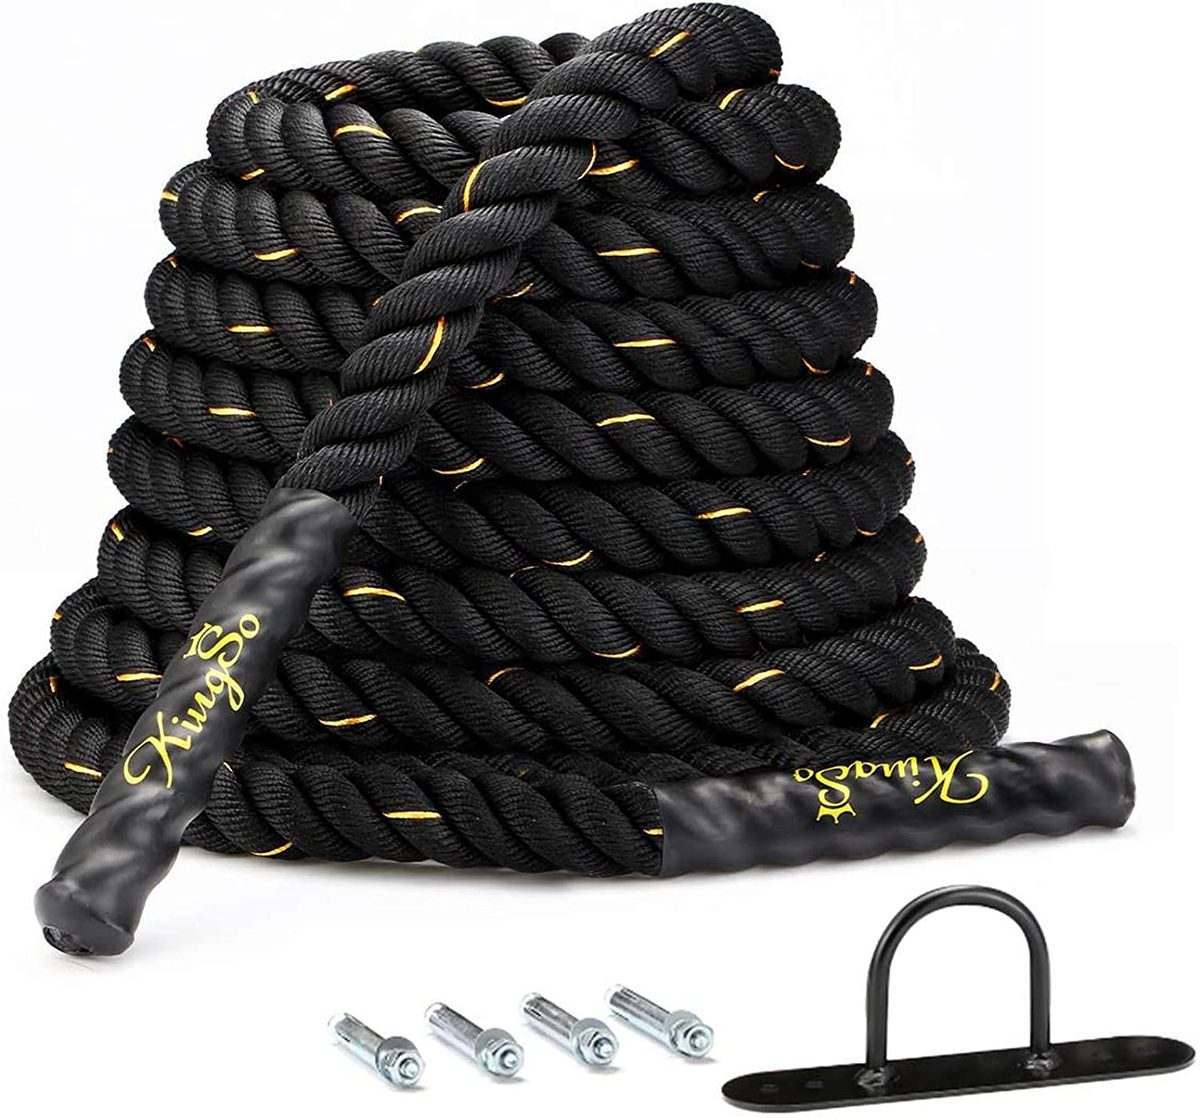 KINGSO Battle Rope 1.5 Inch Heavy Battle Exercise Training Rope 30ft Length  Workout Rope 100% Dacron Fitness Rope for Strength Training Home Gym